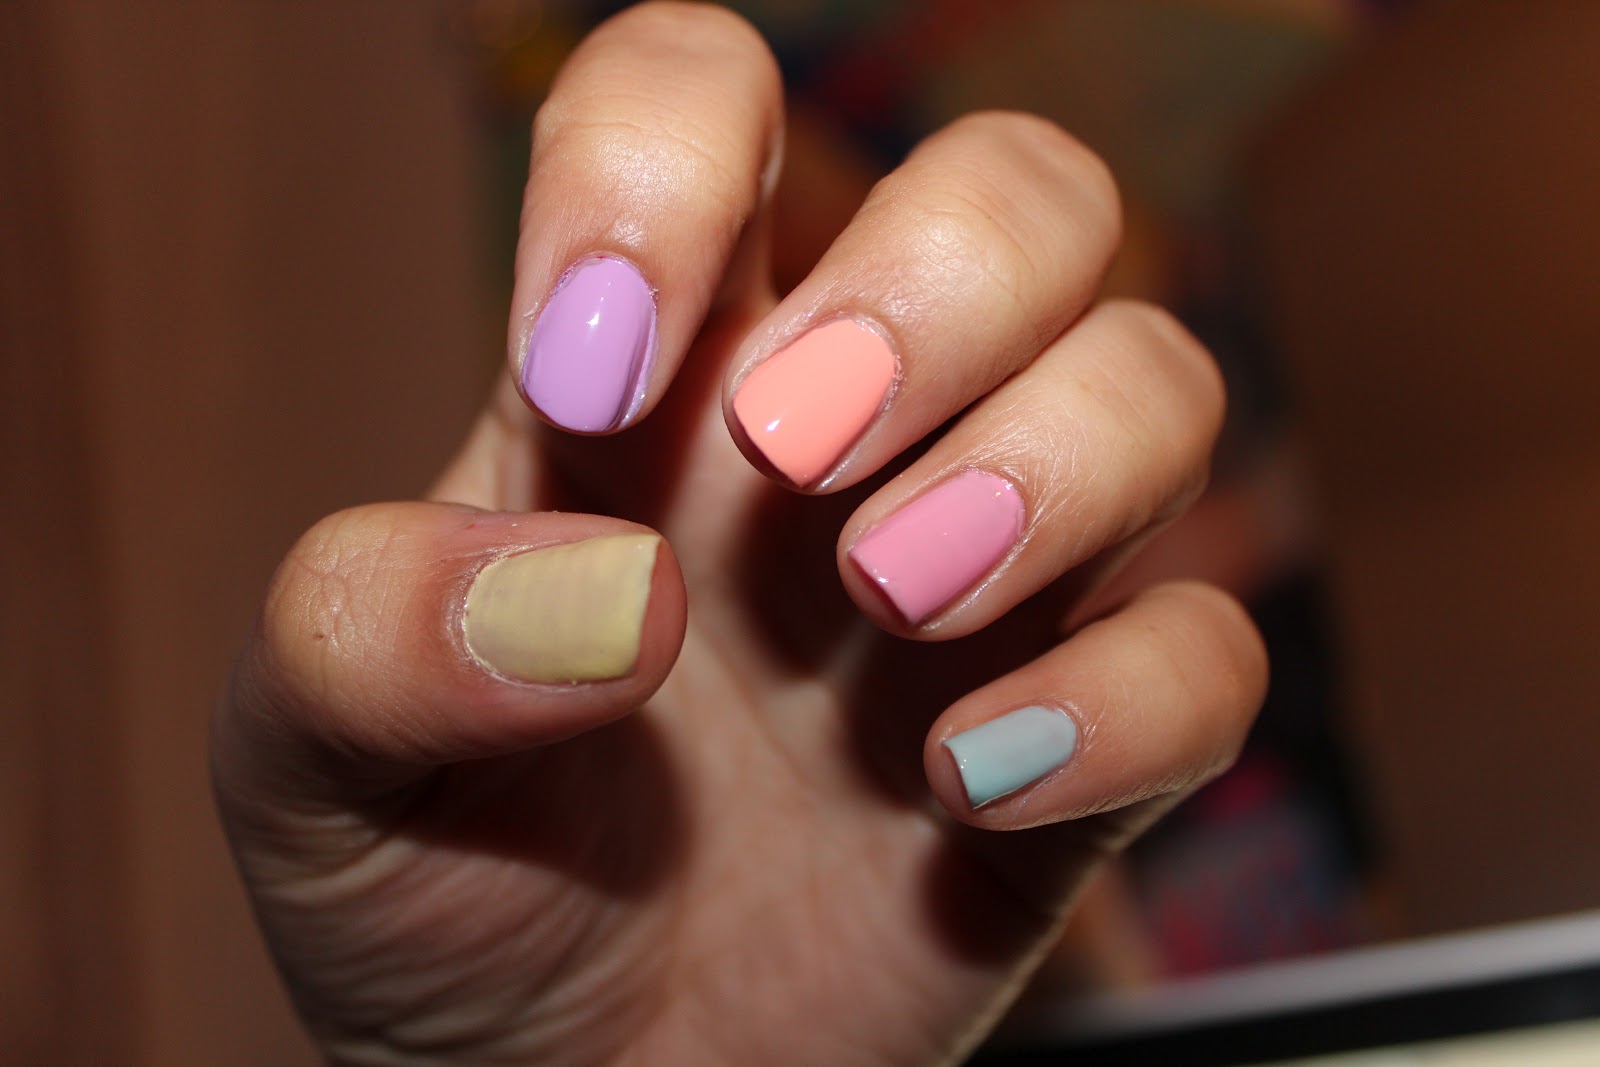 2. "Trendy Pastel Nail Shades for Summer" - wide 5